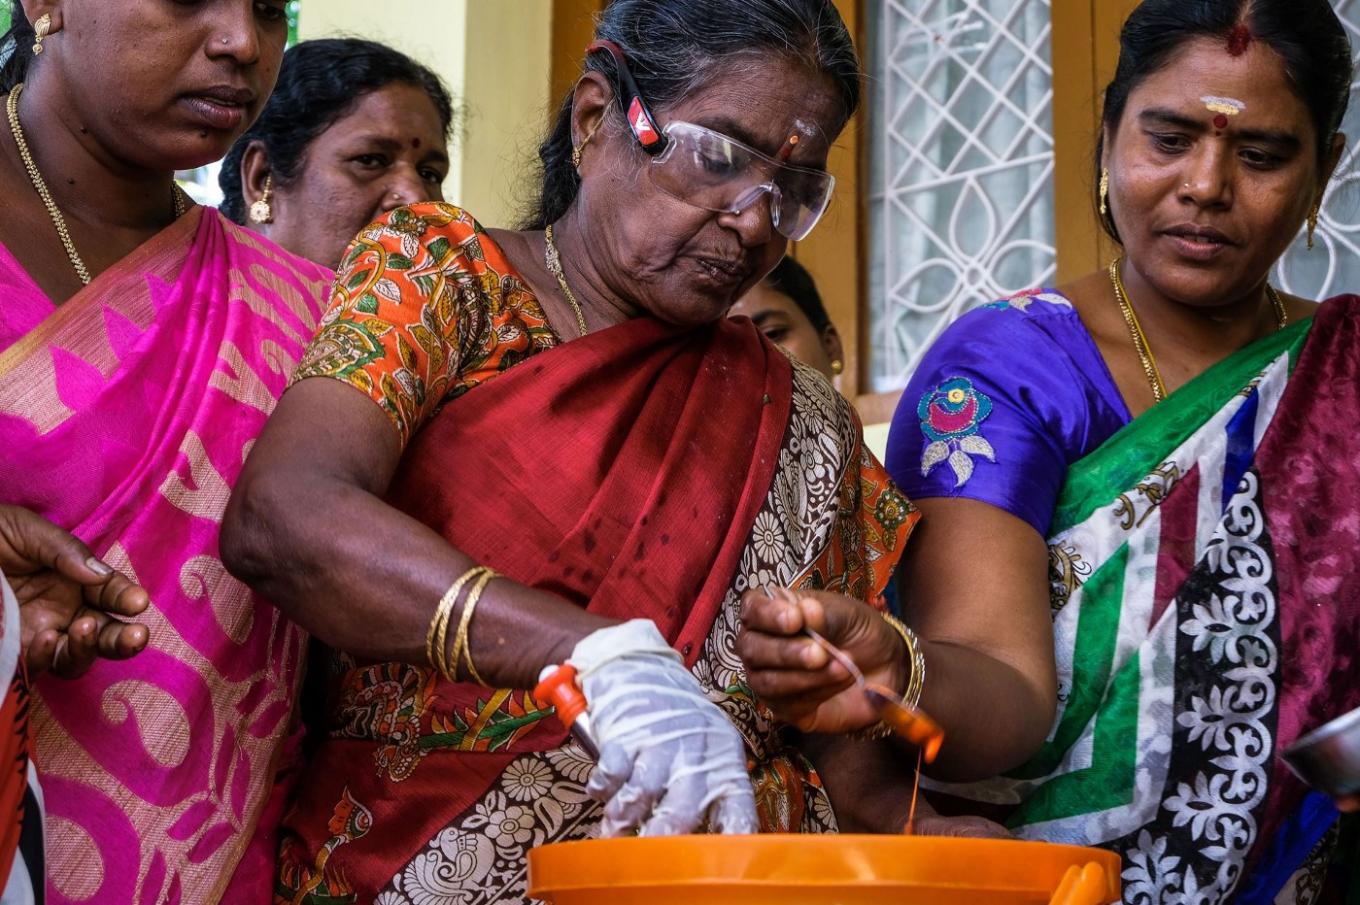 The image of several South Asian women in colorful sarongs. The woman at the center is wearing a latex glove and is mixing something in a large orange bucket.